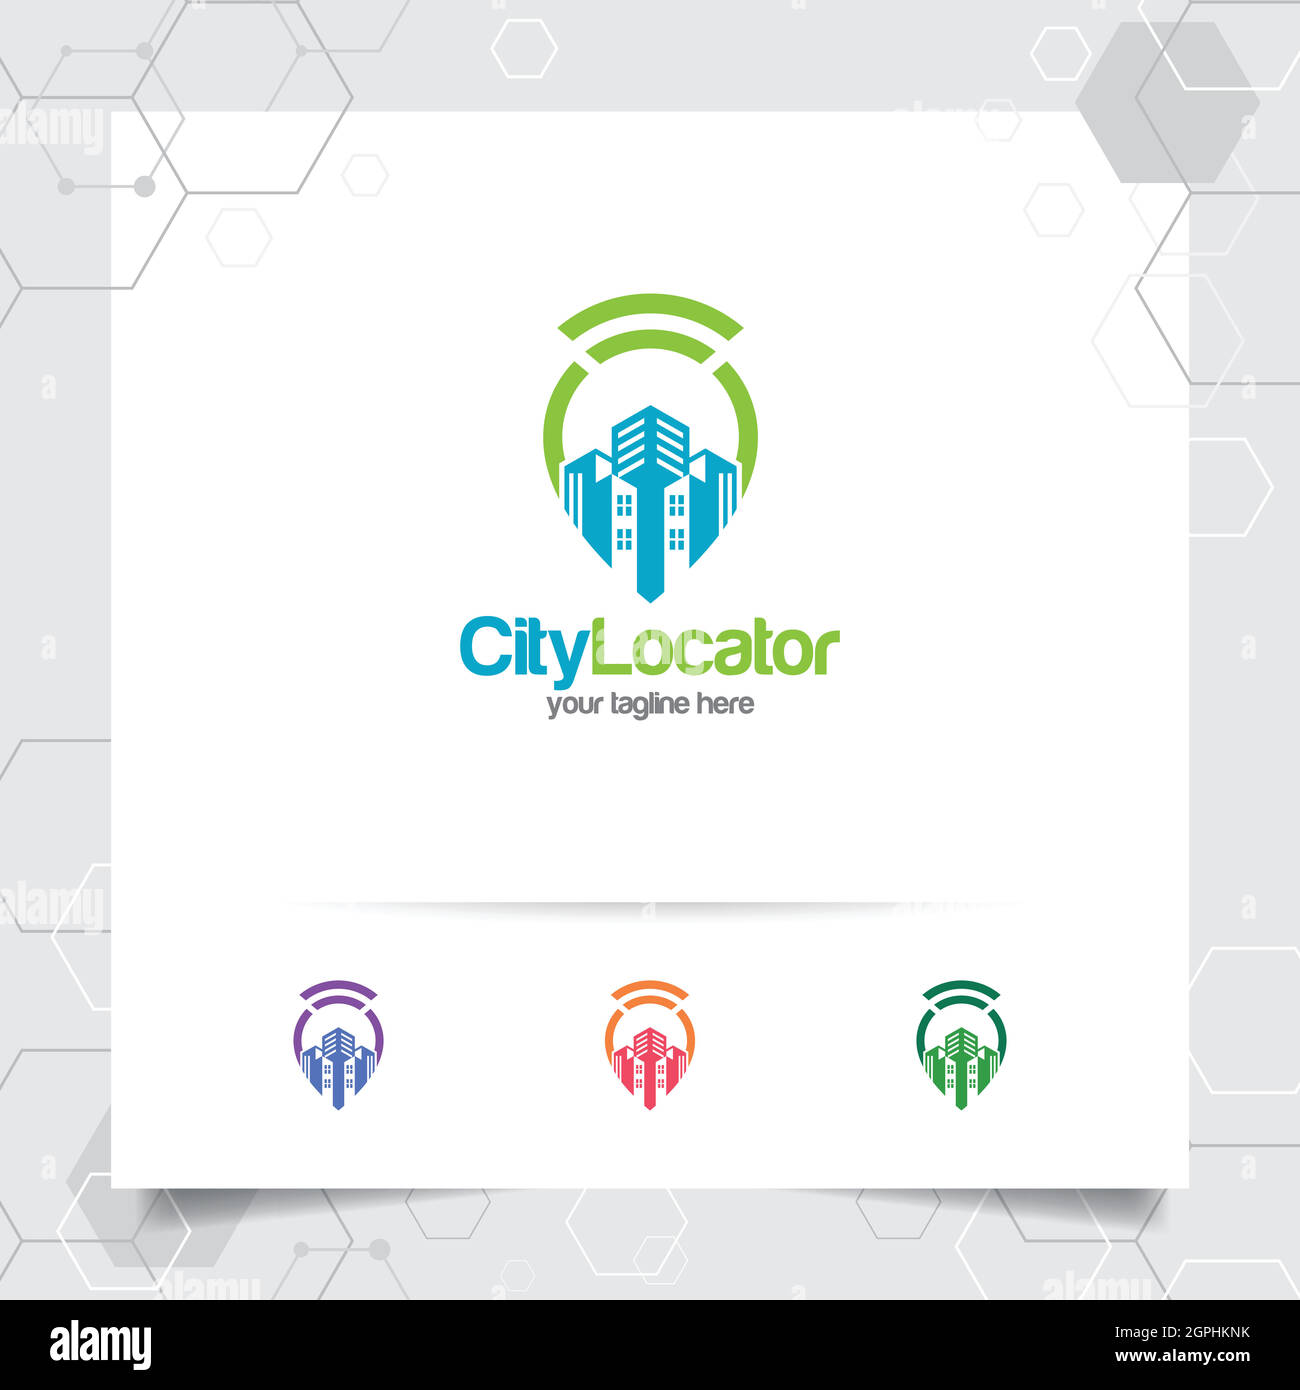 City locate logo vector with concept of pin map locator and wifi cityscape symbol design for travel, local guide, gps, and tour. Stock Vector